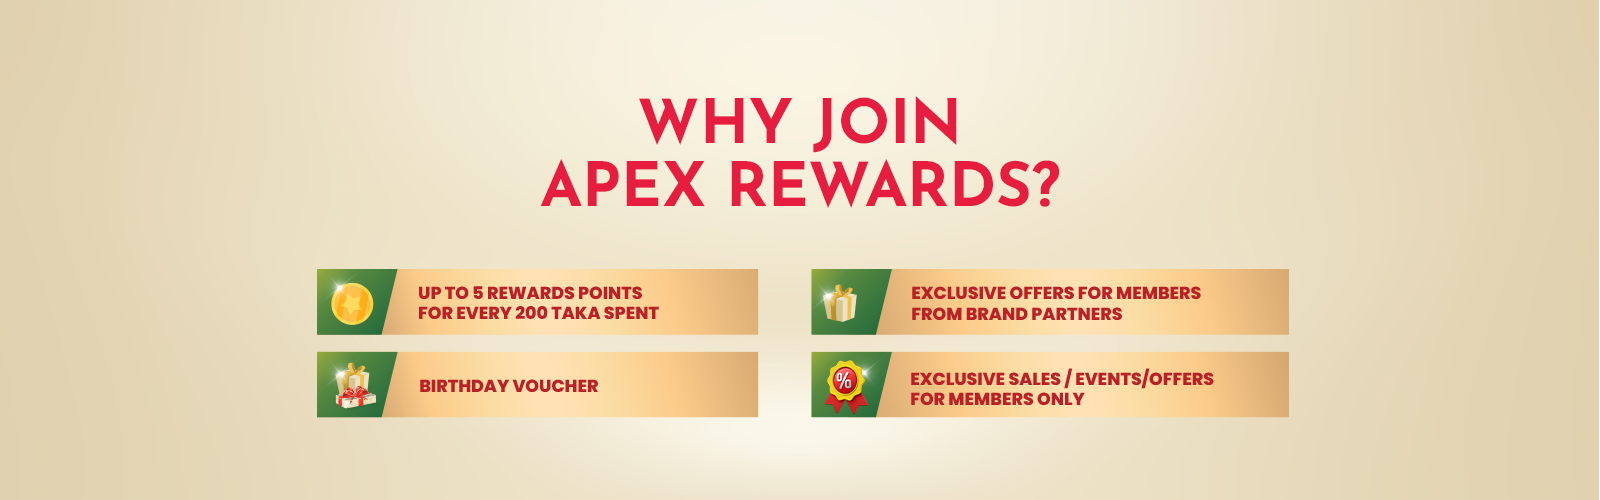 Why join apex rewards